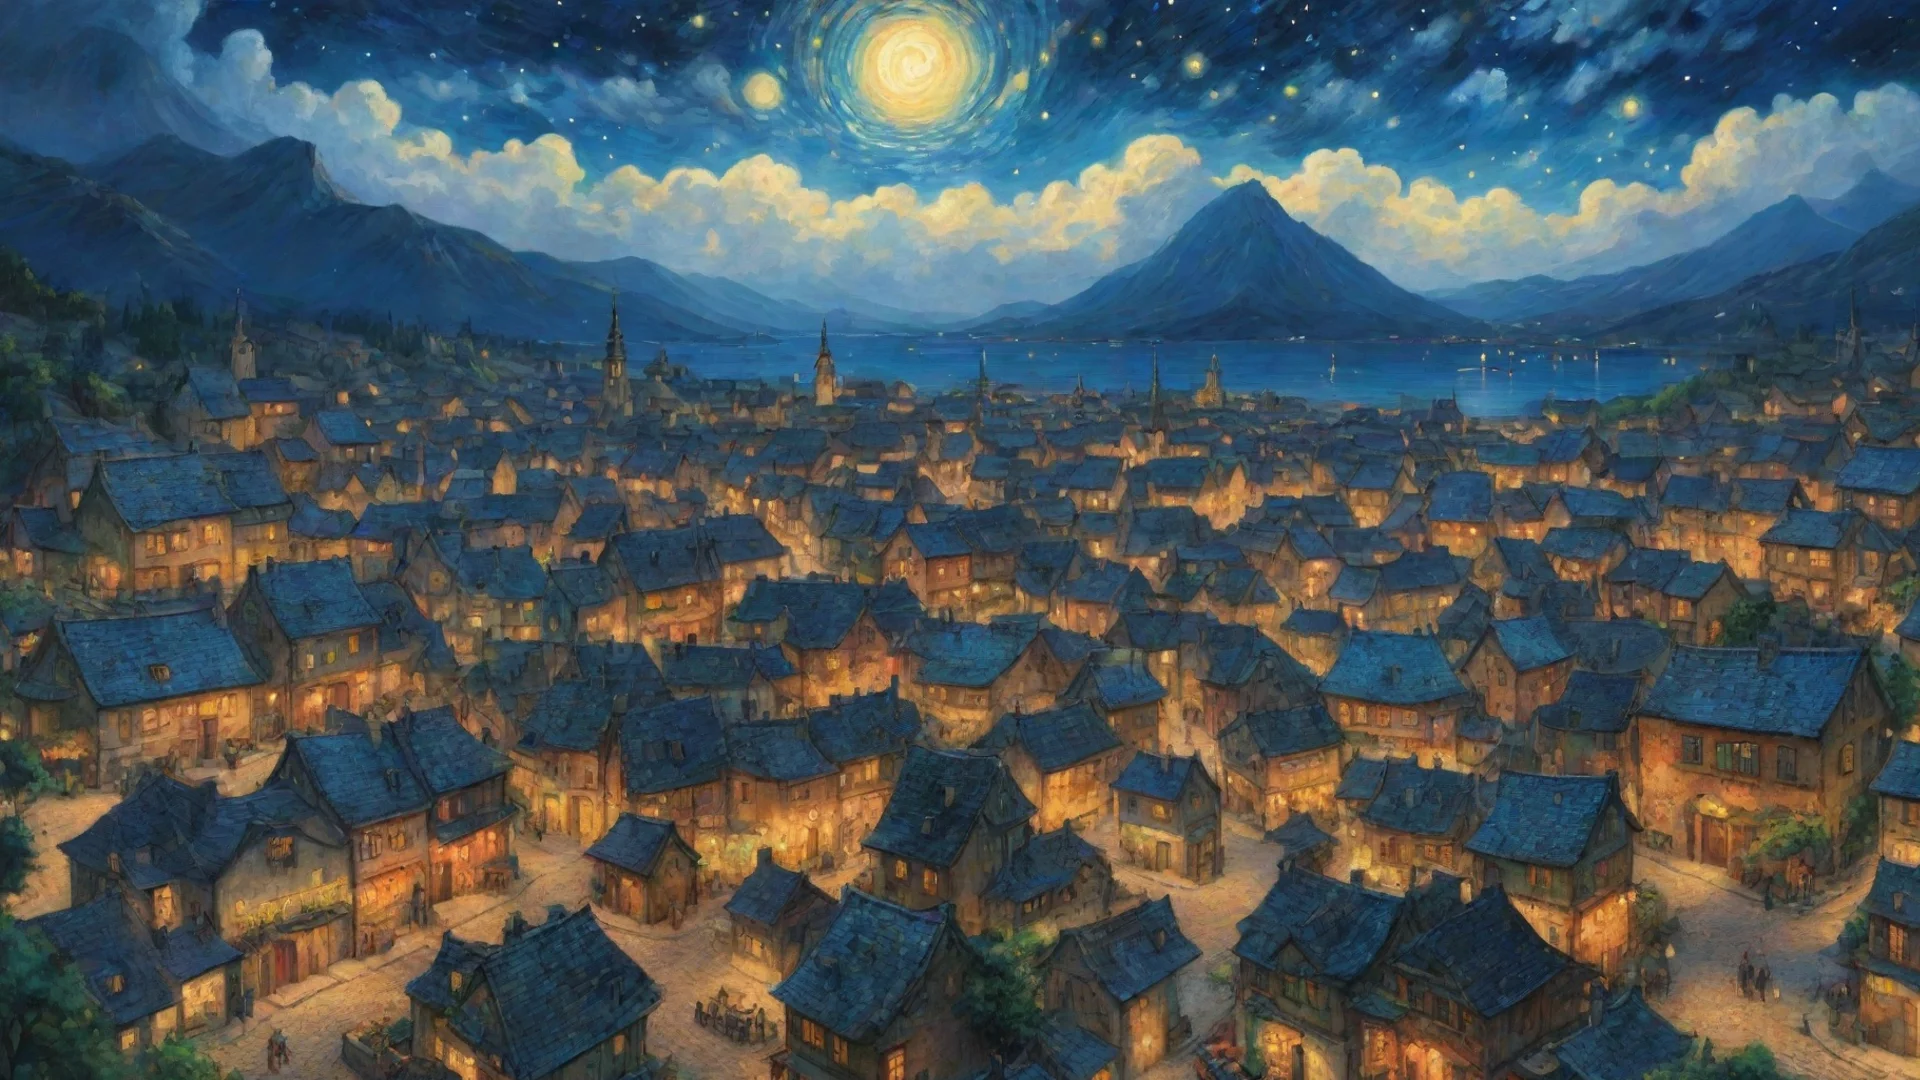 trending heavenly epic town lit up at night sky epic lovely artistic ghibli van gogh happyness bliss peace  detailed asthetic hd wow good looking fantastic 1 wide